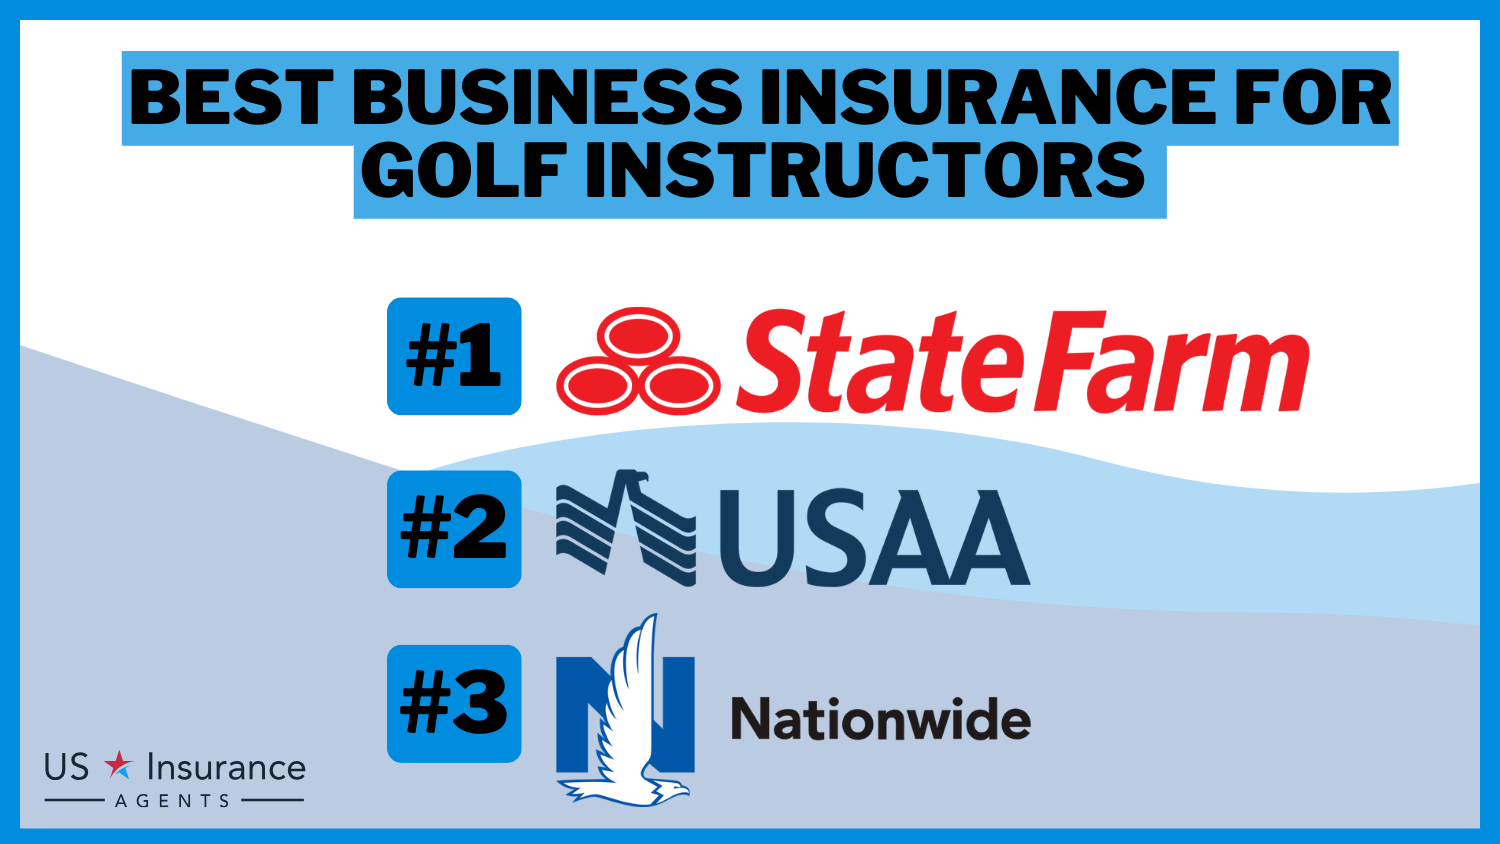 Best Business Insurance for Gold Instructors: State Farm, USAA and Nationwide